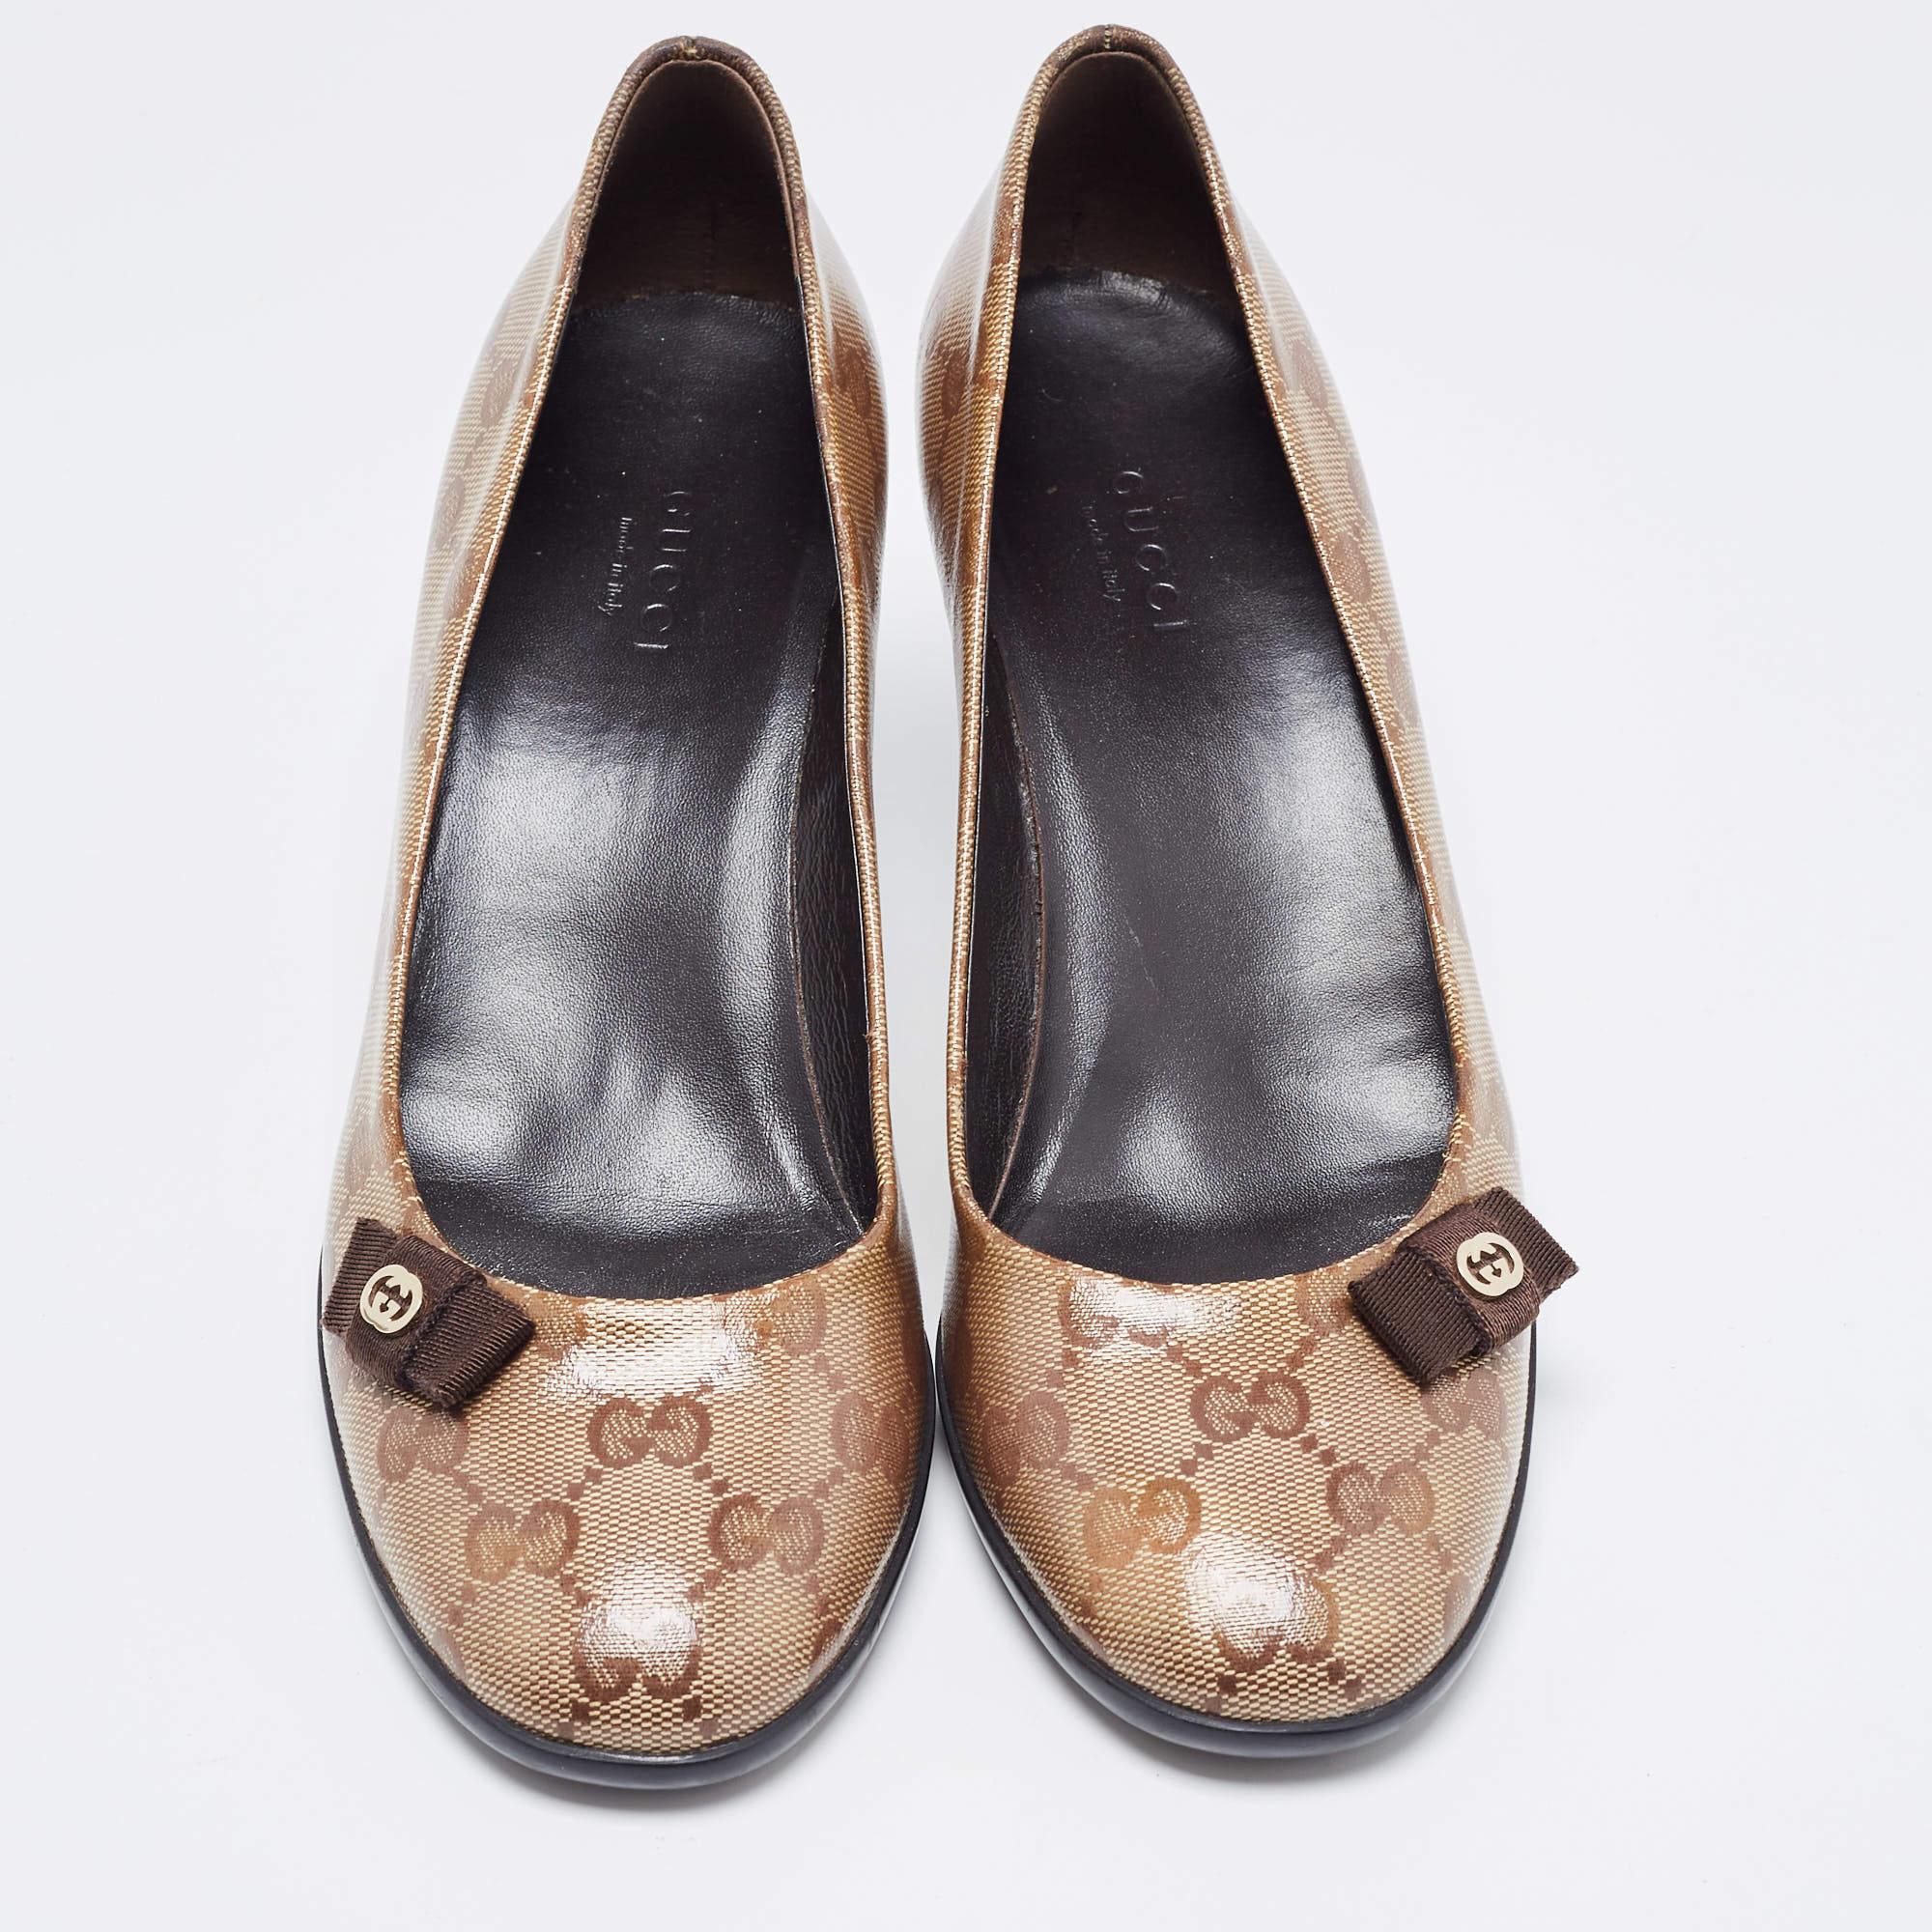 Make a statement with these Gucci pumps for women. Impeccably crafted, these chic heels offer both fashion and comfort, elevating your look with each graceful step.

Includes: Original Dustbag

